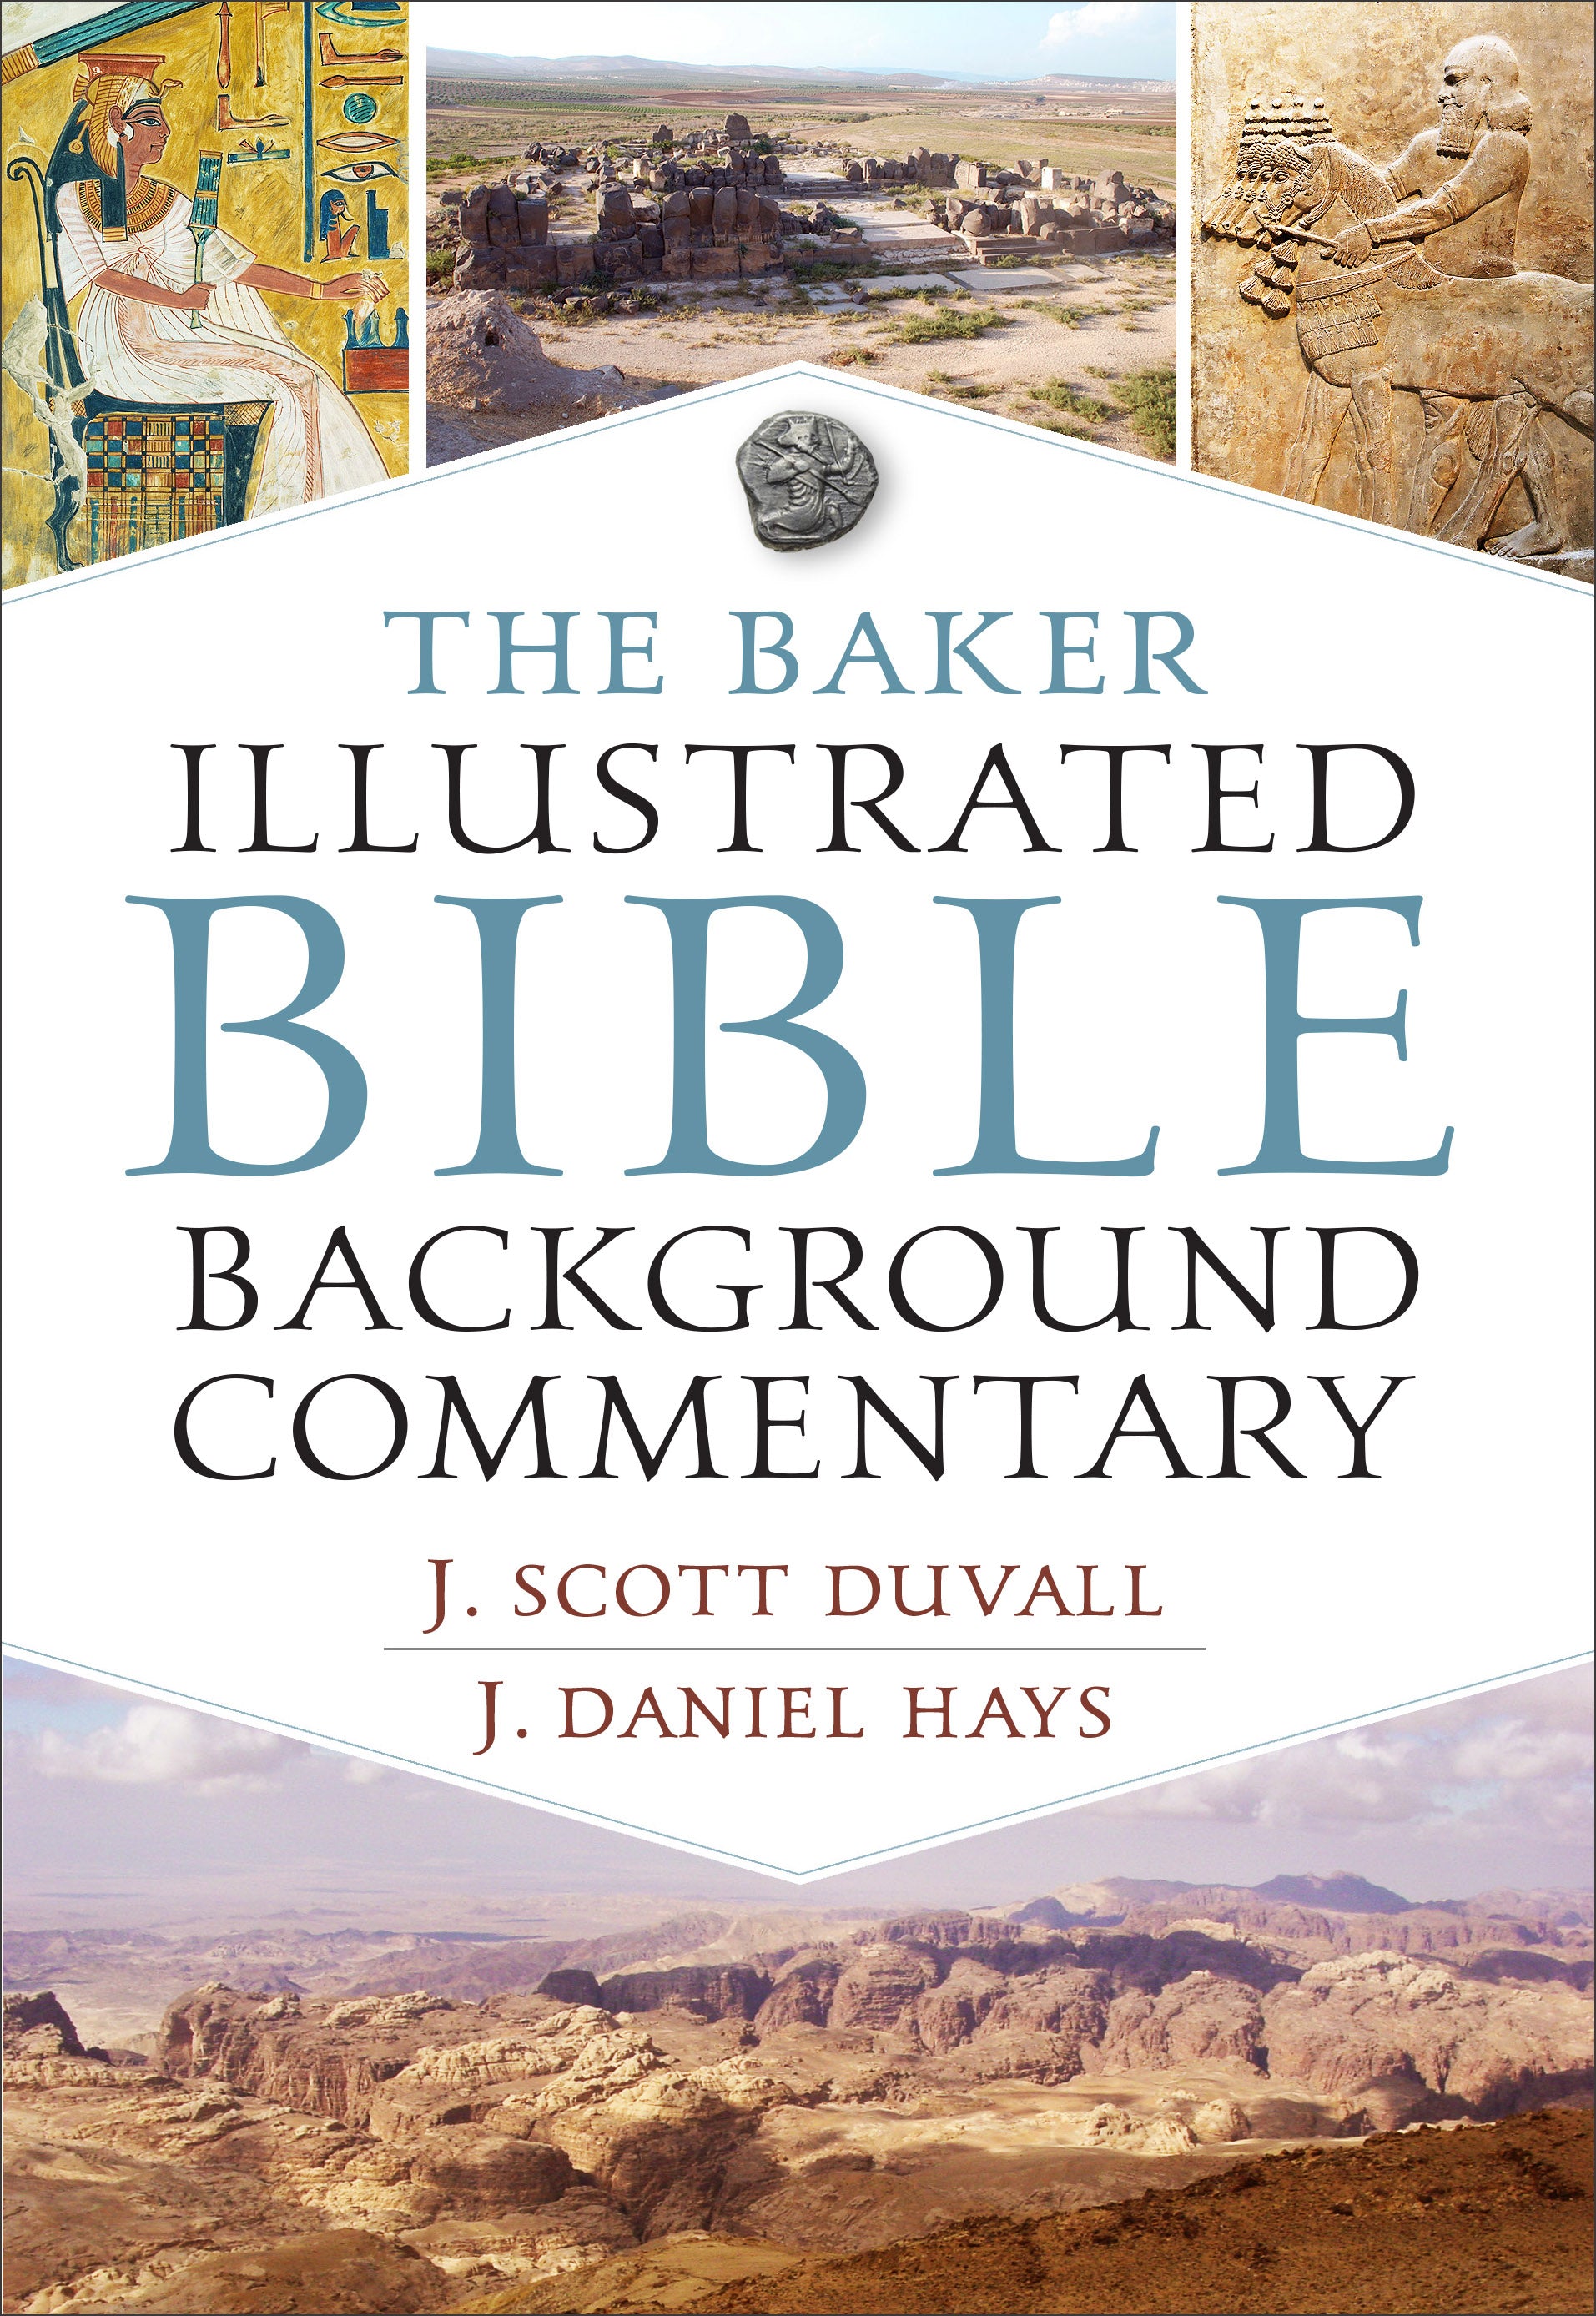 Image of The Baker Illustrated Bible Background Commentary other